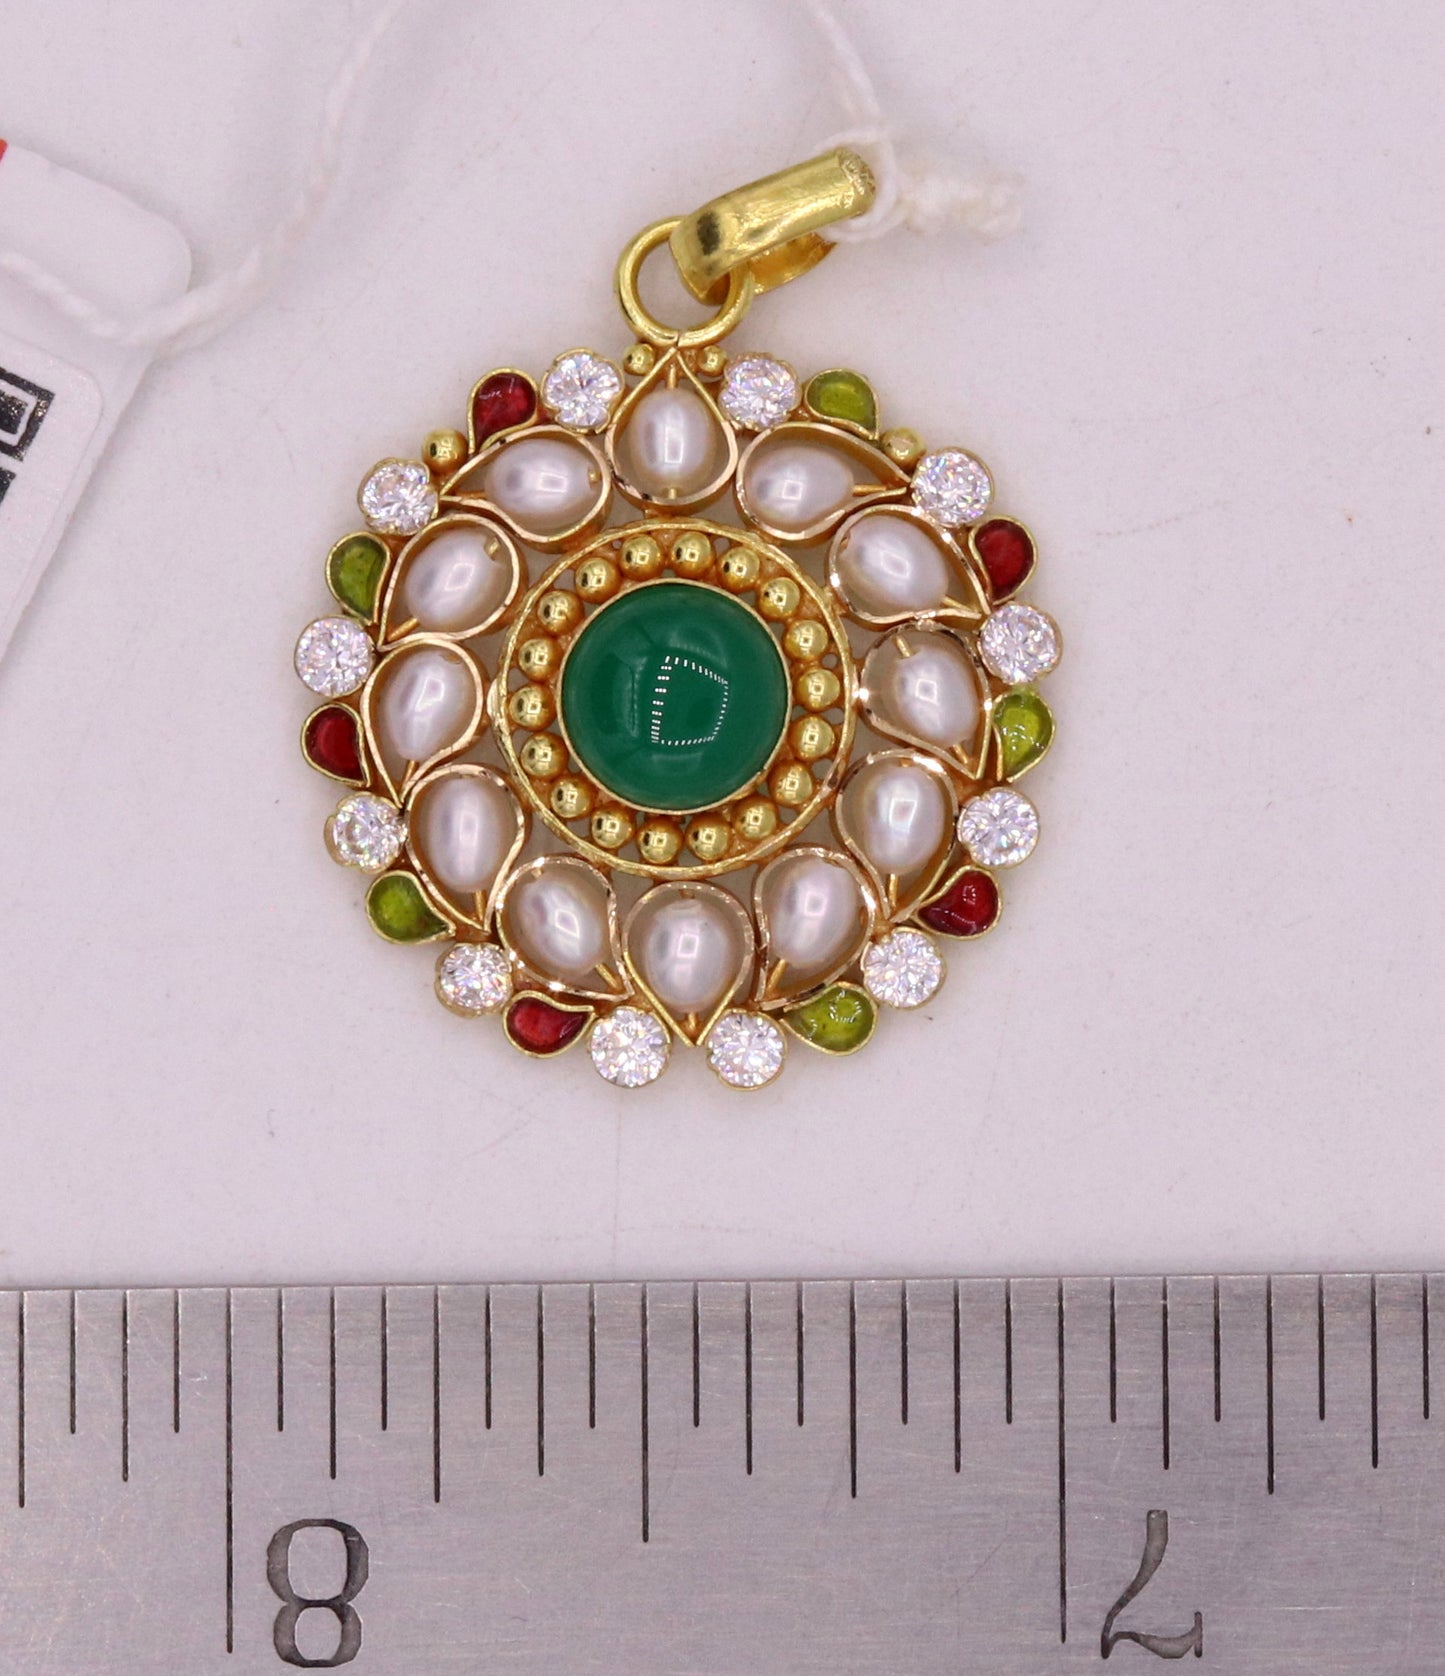 Vintage stylish handmade 22k yellow gold real white pearl jadau green color stone fabulous pendant necklace Indian jewelry - TRIBAL ORNAMENTS